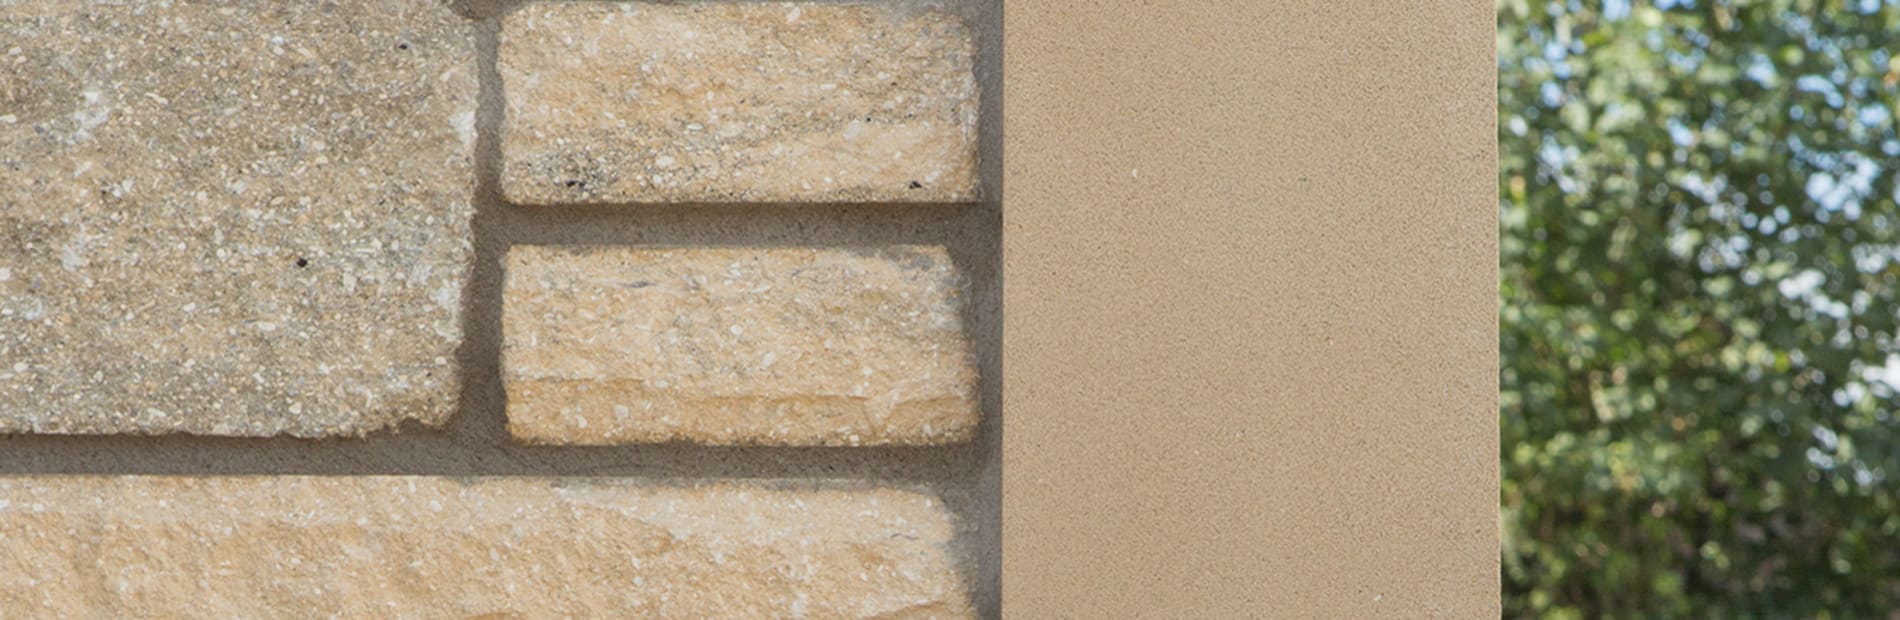 Semi-dry and fibre reinforced cast stone